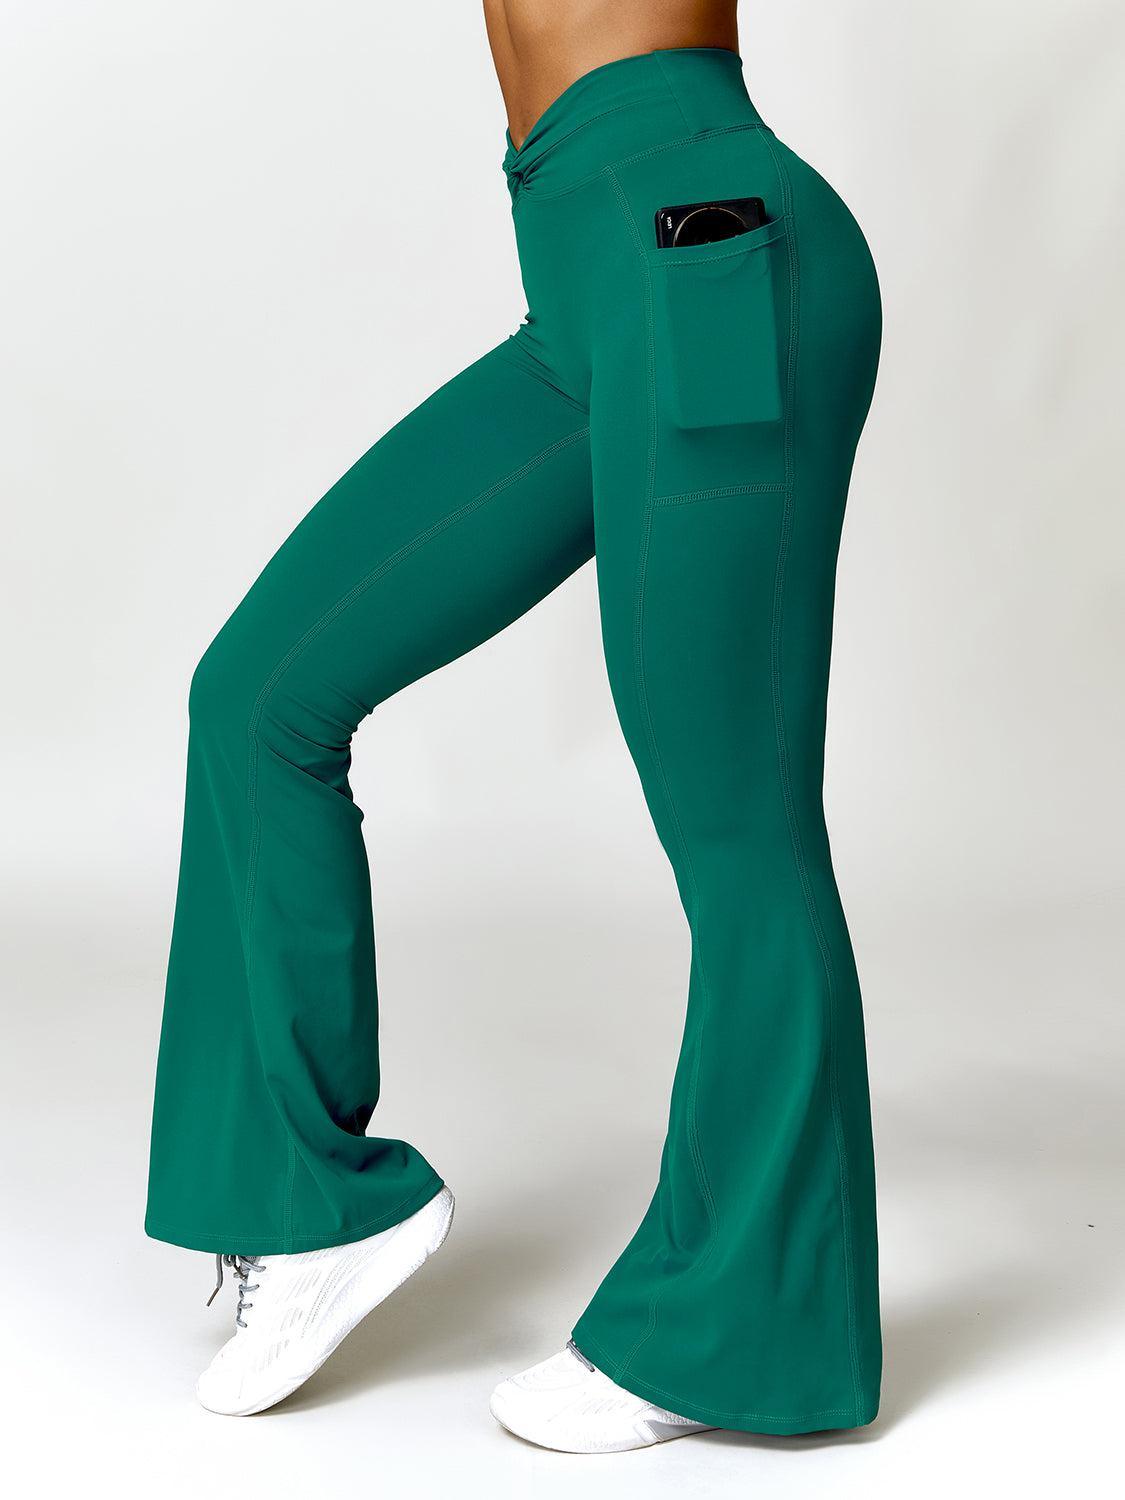 a woman in green pants and white sneakers